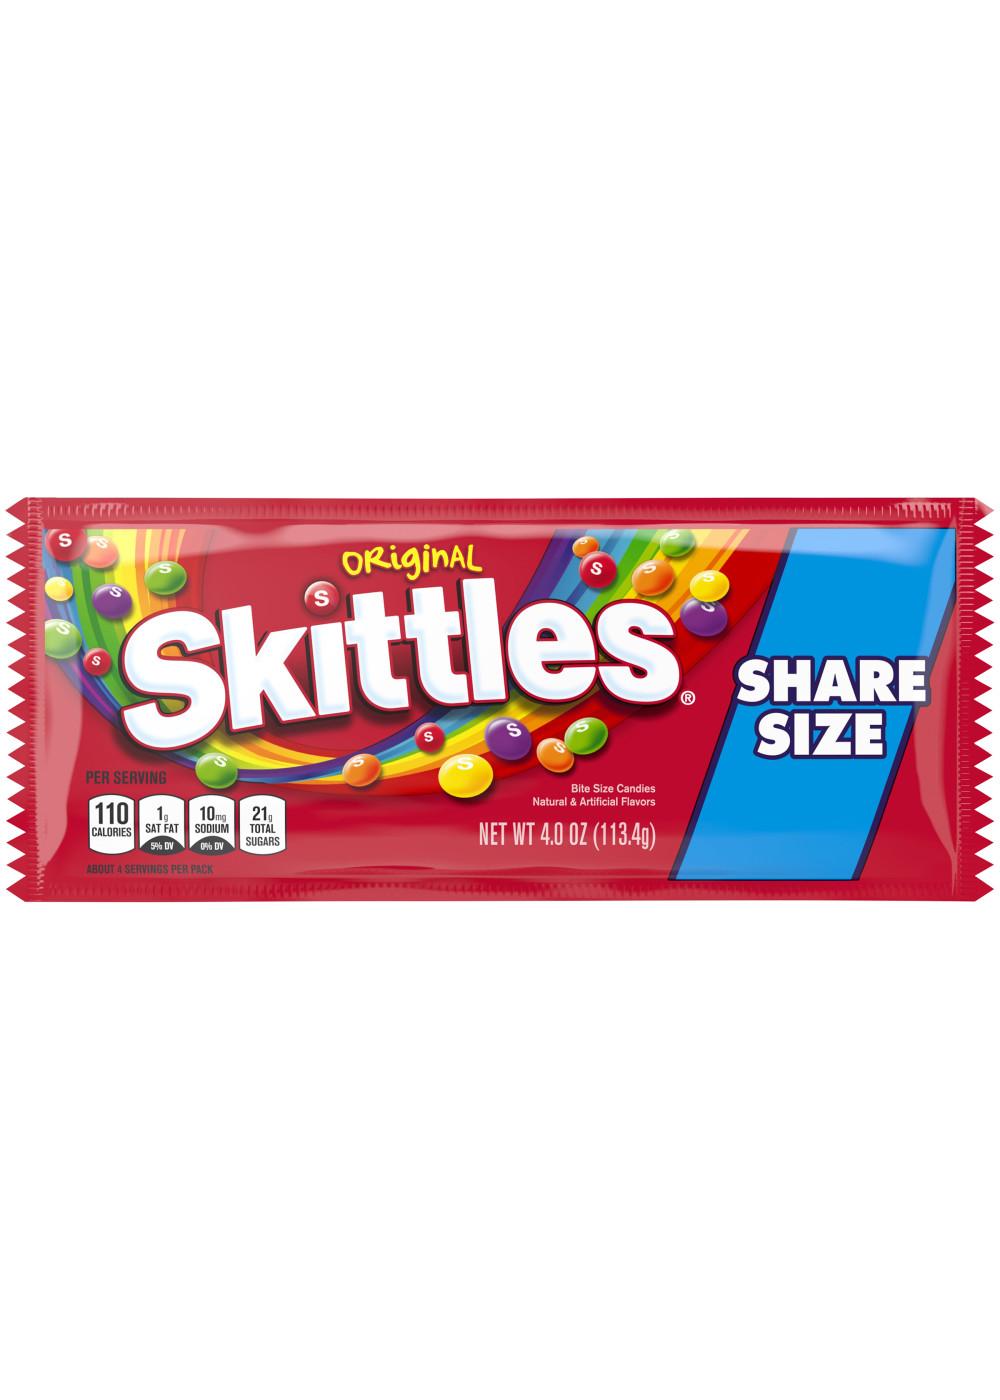 Skittles Original Fruity Candy - Share Size; image 1 of 5